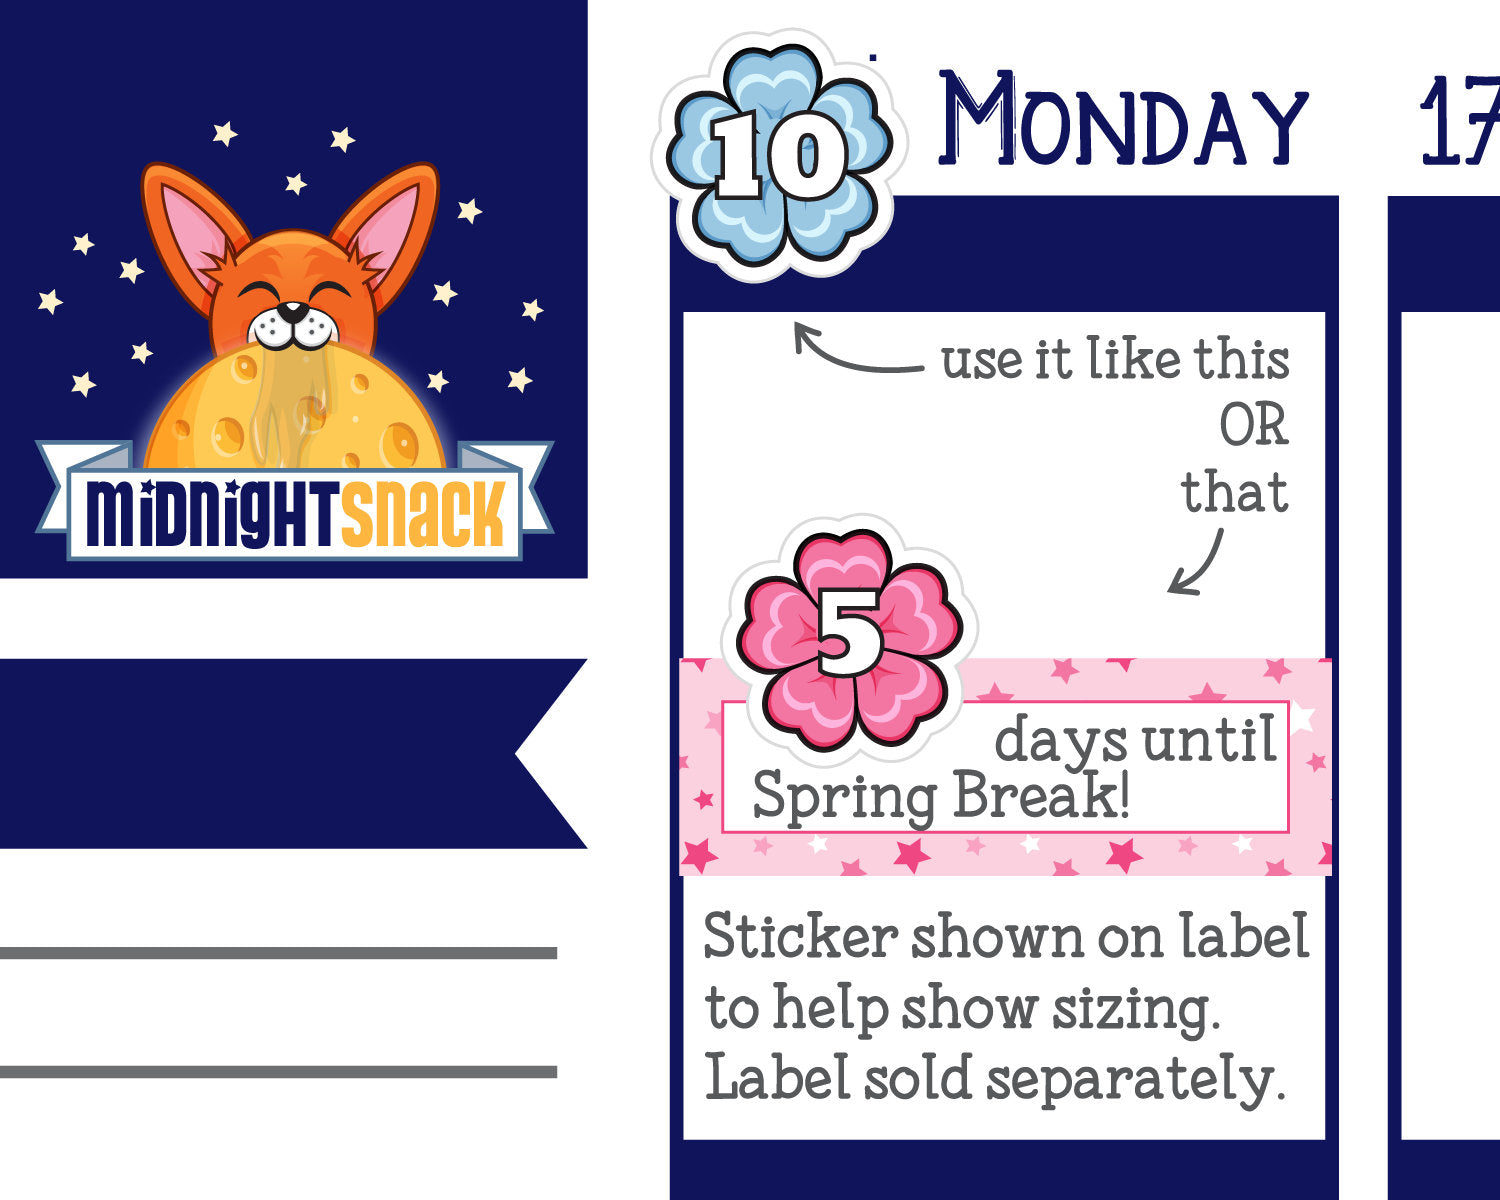 Spring Flower Date Cover Planner Stickers Midnight Snack Planner